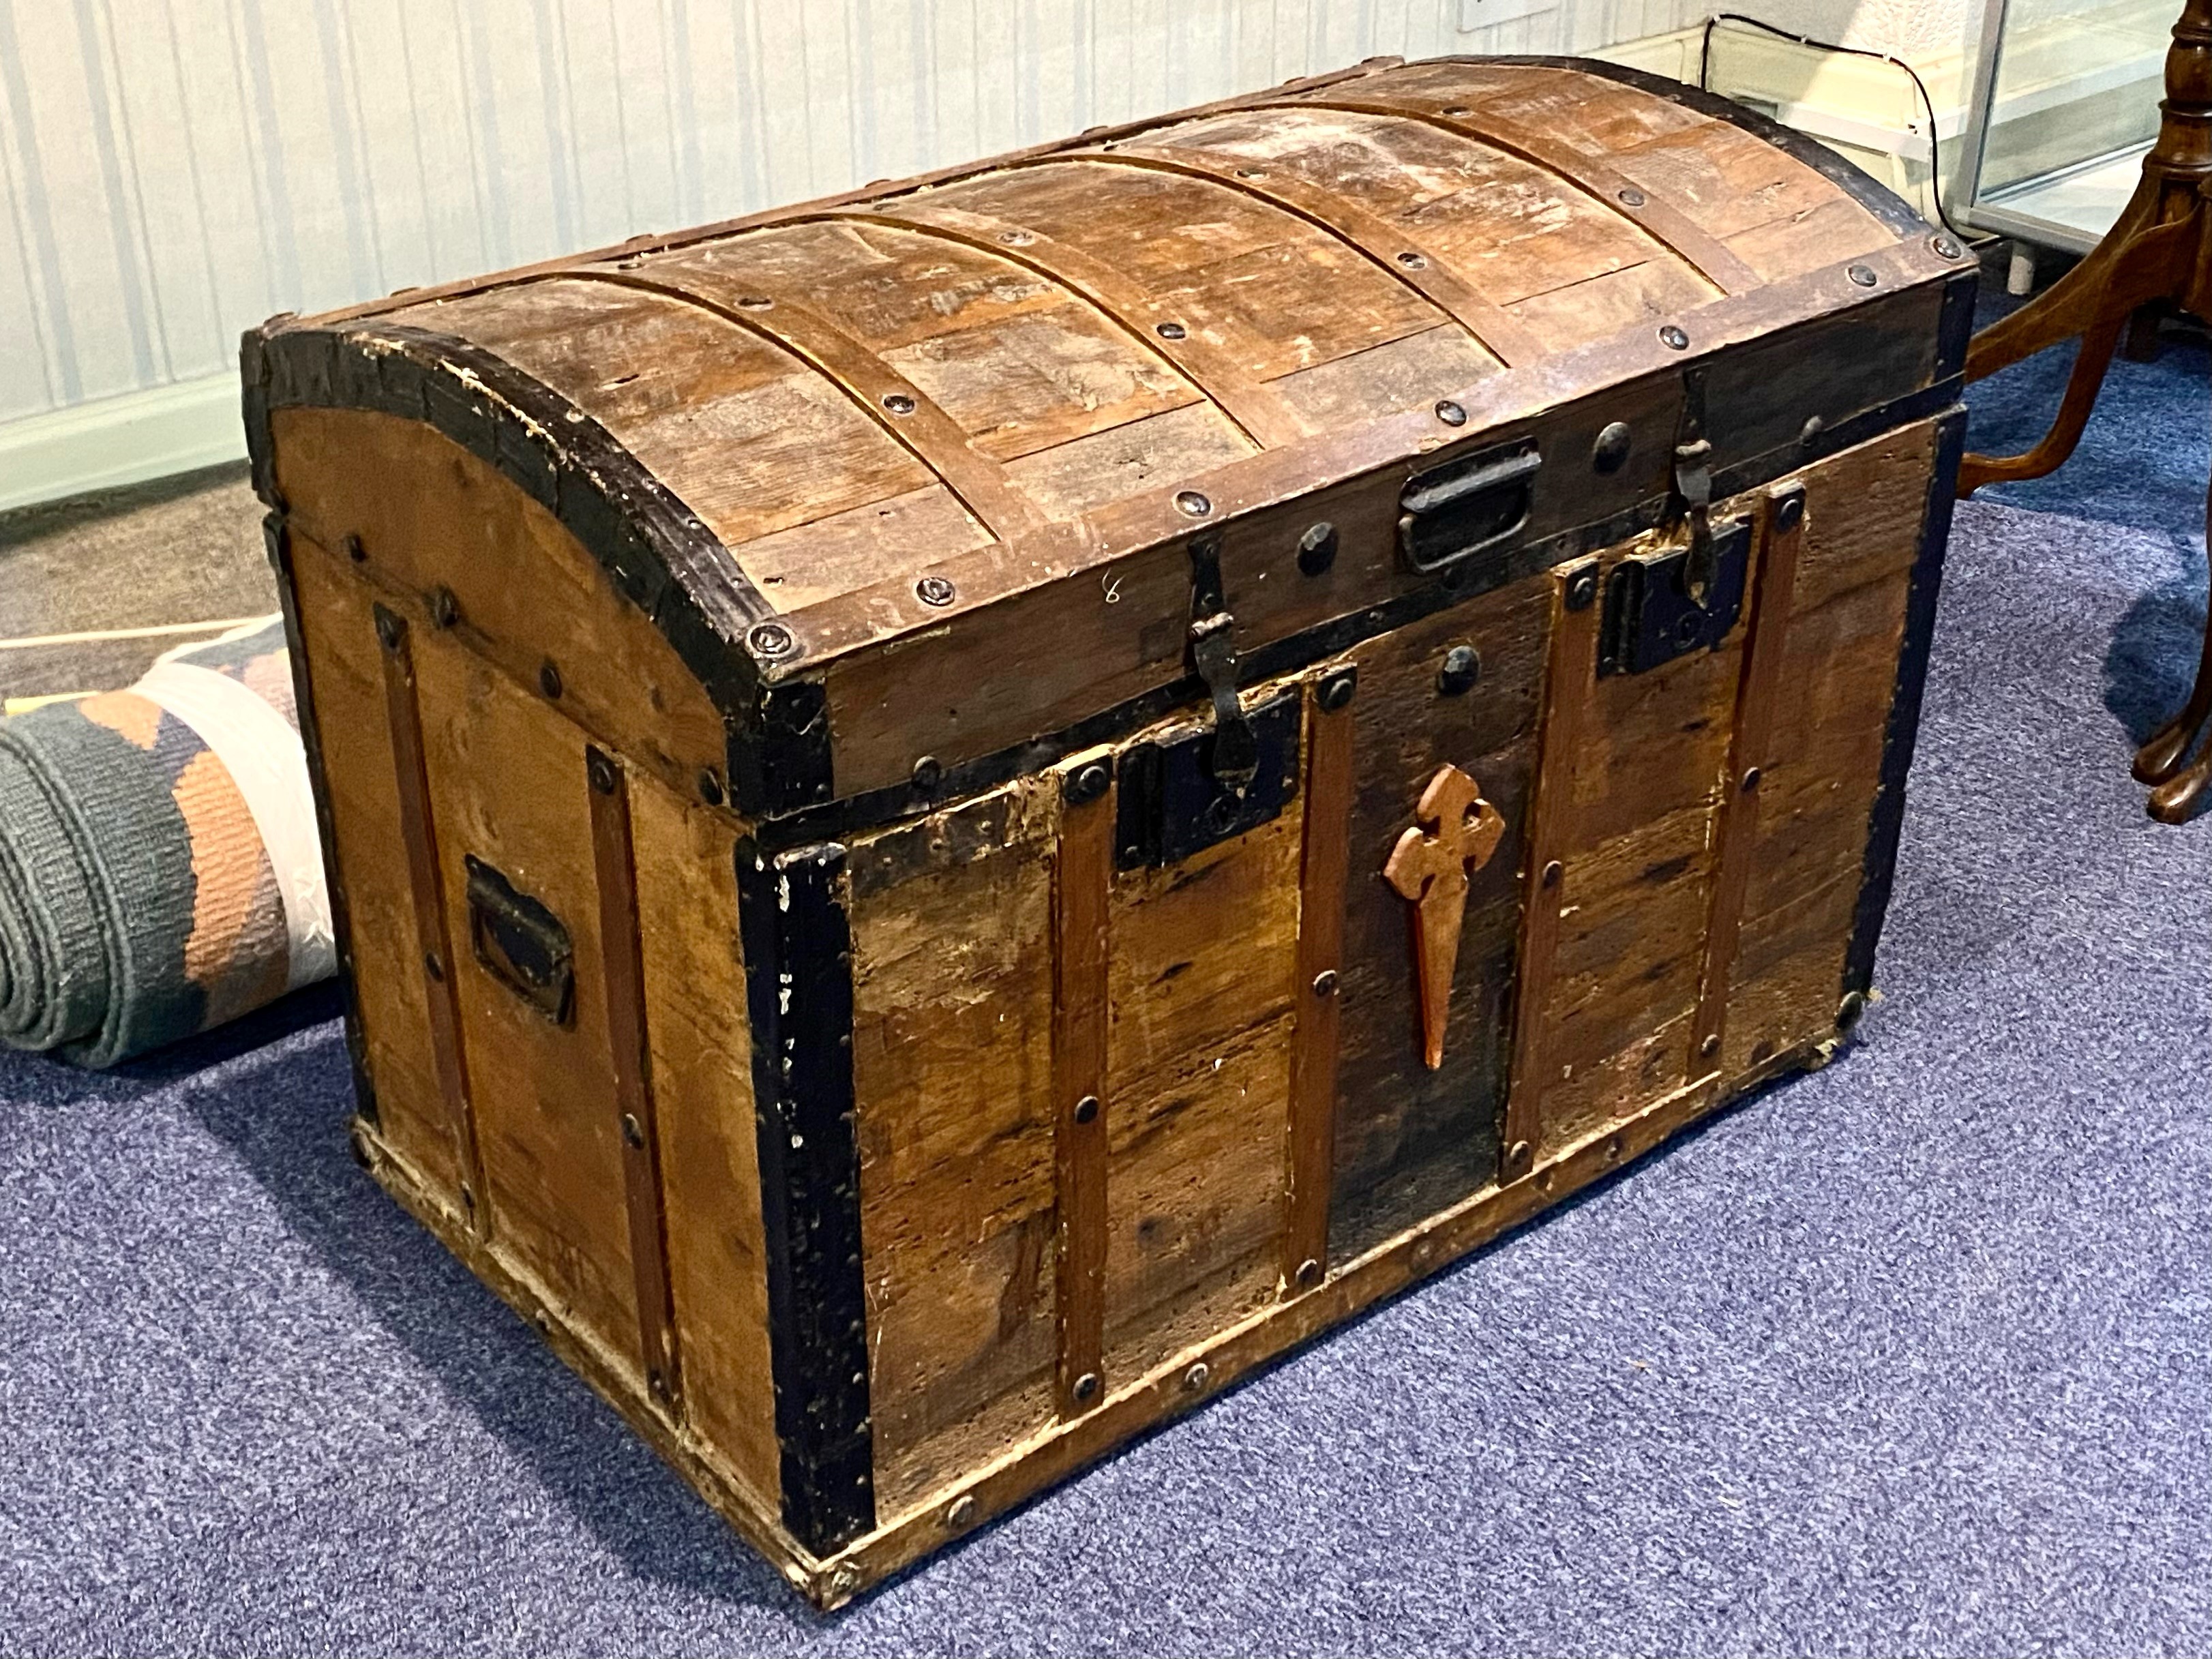 Large Wooden Metal Bound Trunk, with a collection of small rugs. Trunk full of small rugs, various - Image 4 of 5